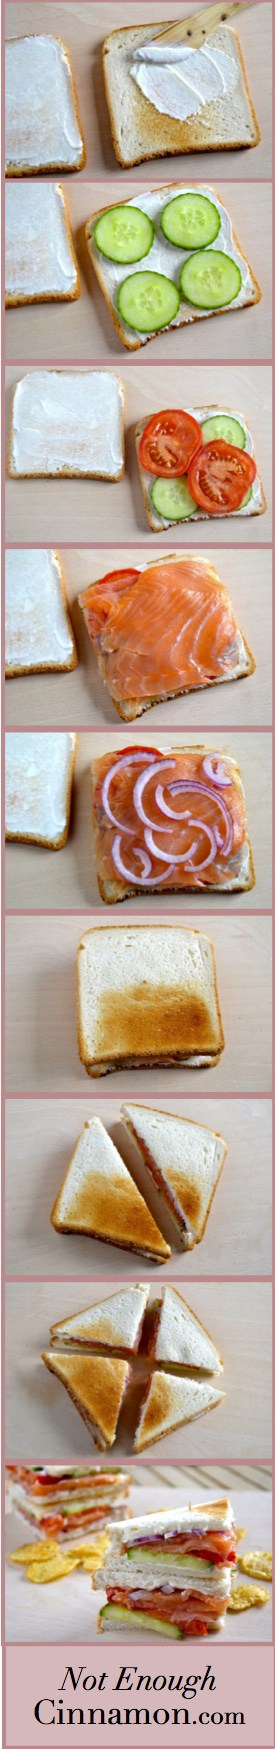 Smoked Salmon Club Sandwich - an elegant twist on the All American Classic Clubhouse Sandwich. Layered with smoked salmon, cream cheese, cucumber and onion slices, this easy sandwich makes for a great light lunch or picnic food. | www.notenoughcinnamon.com | #sandwich, #easy, #salmon, #picnic, #lunch, #mealprep, #gourmet